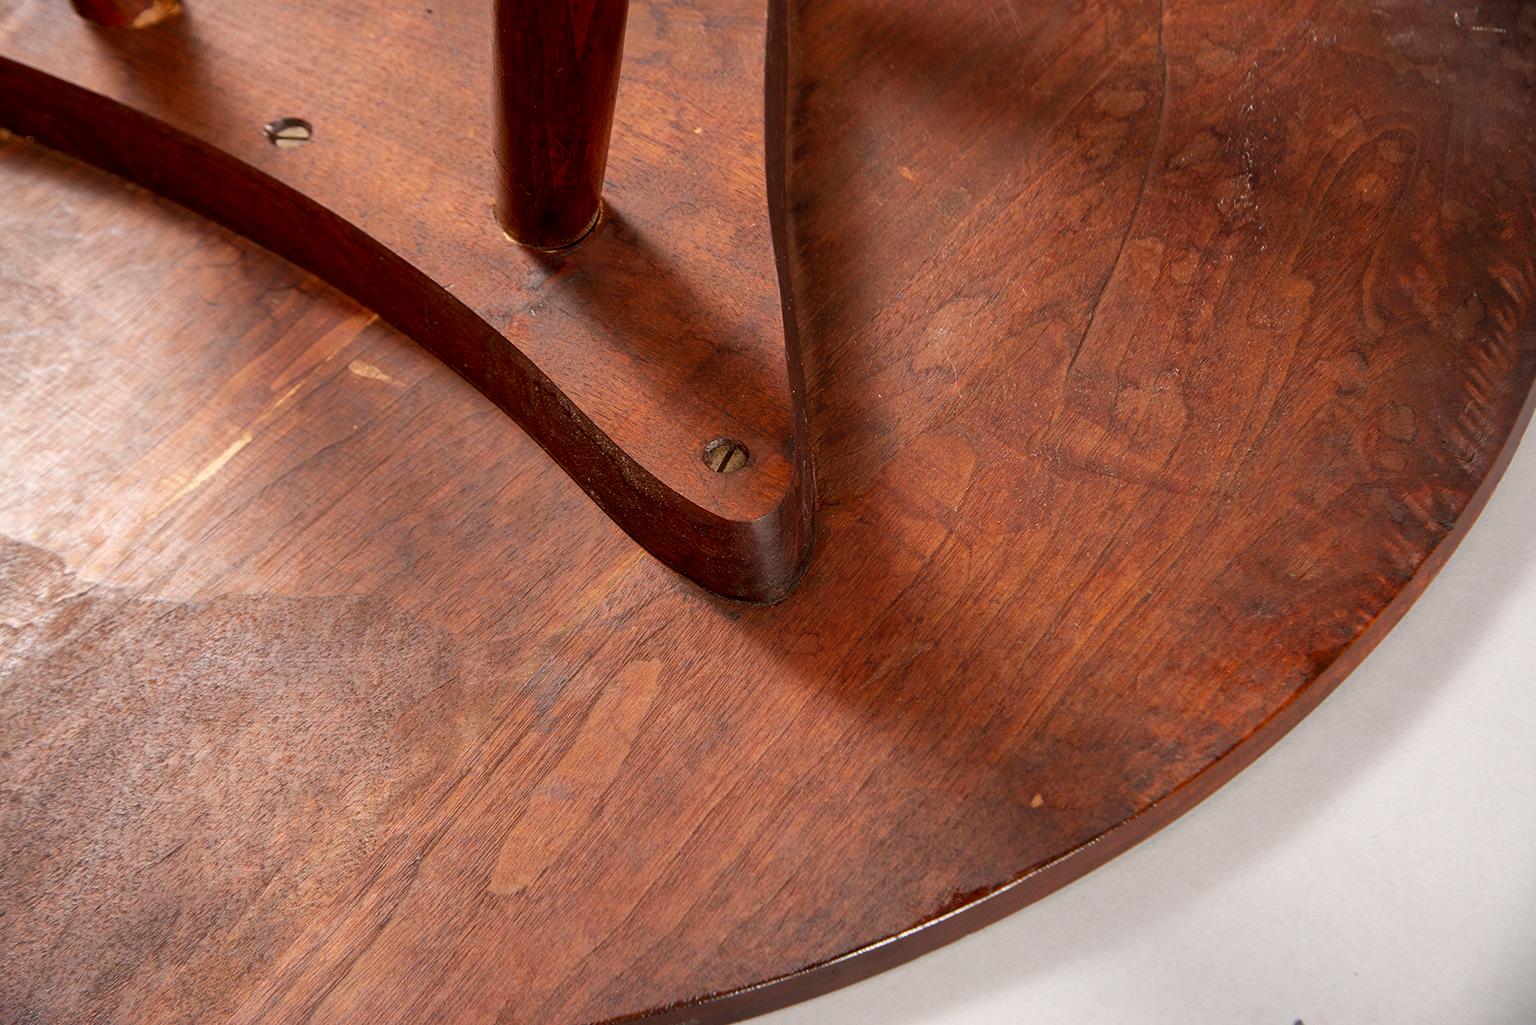 Round, splayed leg, hand-honed side table by George Nakashima, circa early 1950s. Original owner purchased this table directly from Nakashima in 1950s in PA studio. It appears to be walnut with nice grain patterns and has three tapered legs.